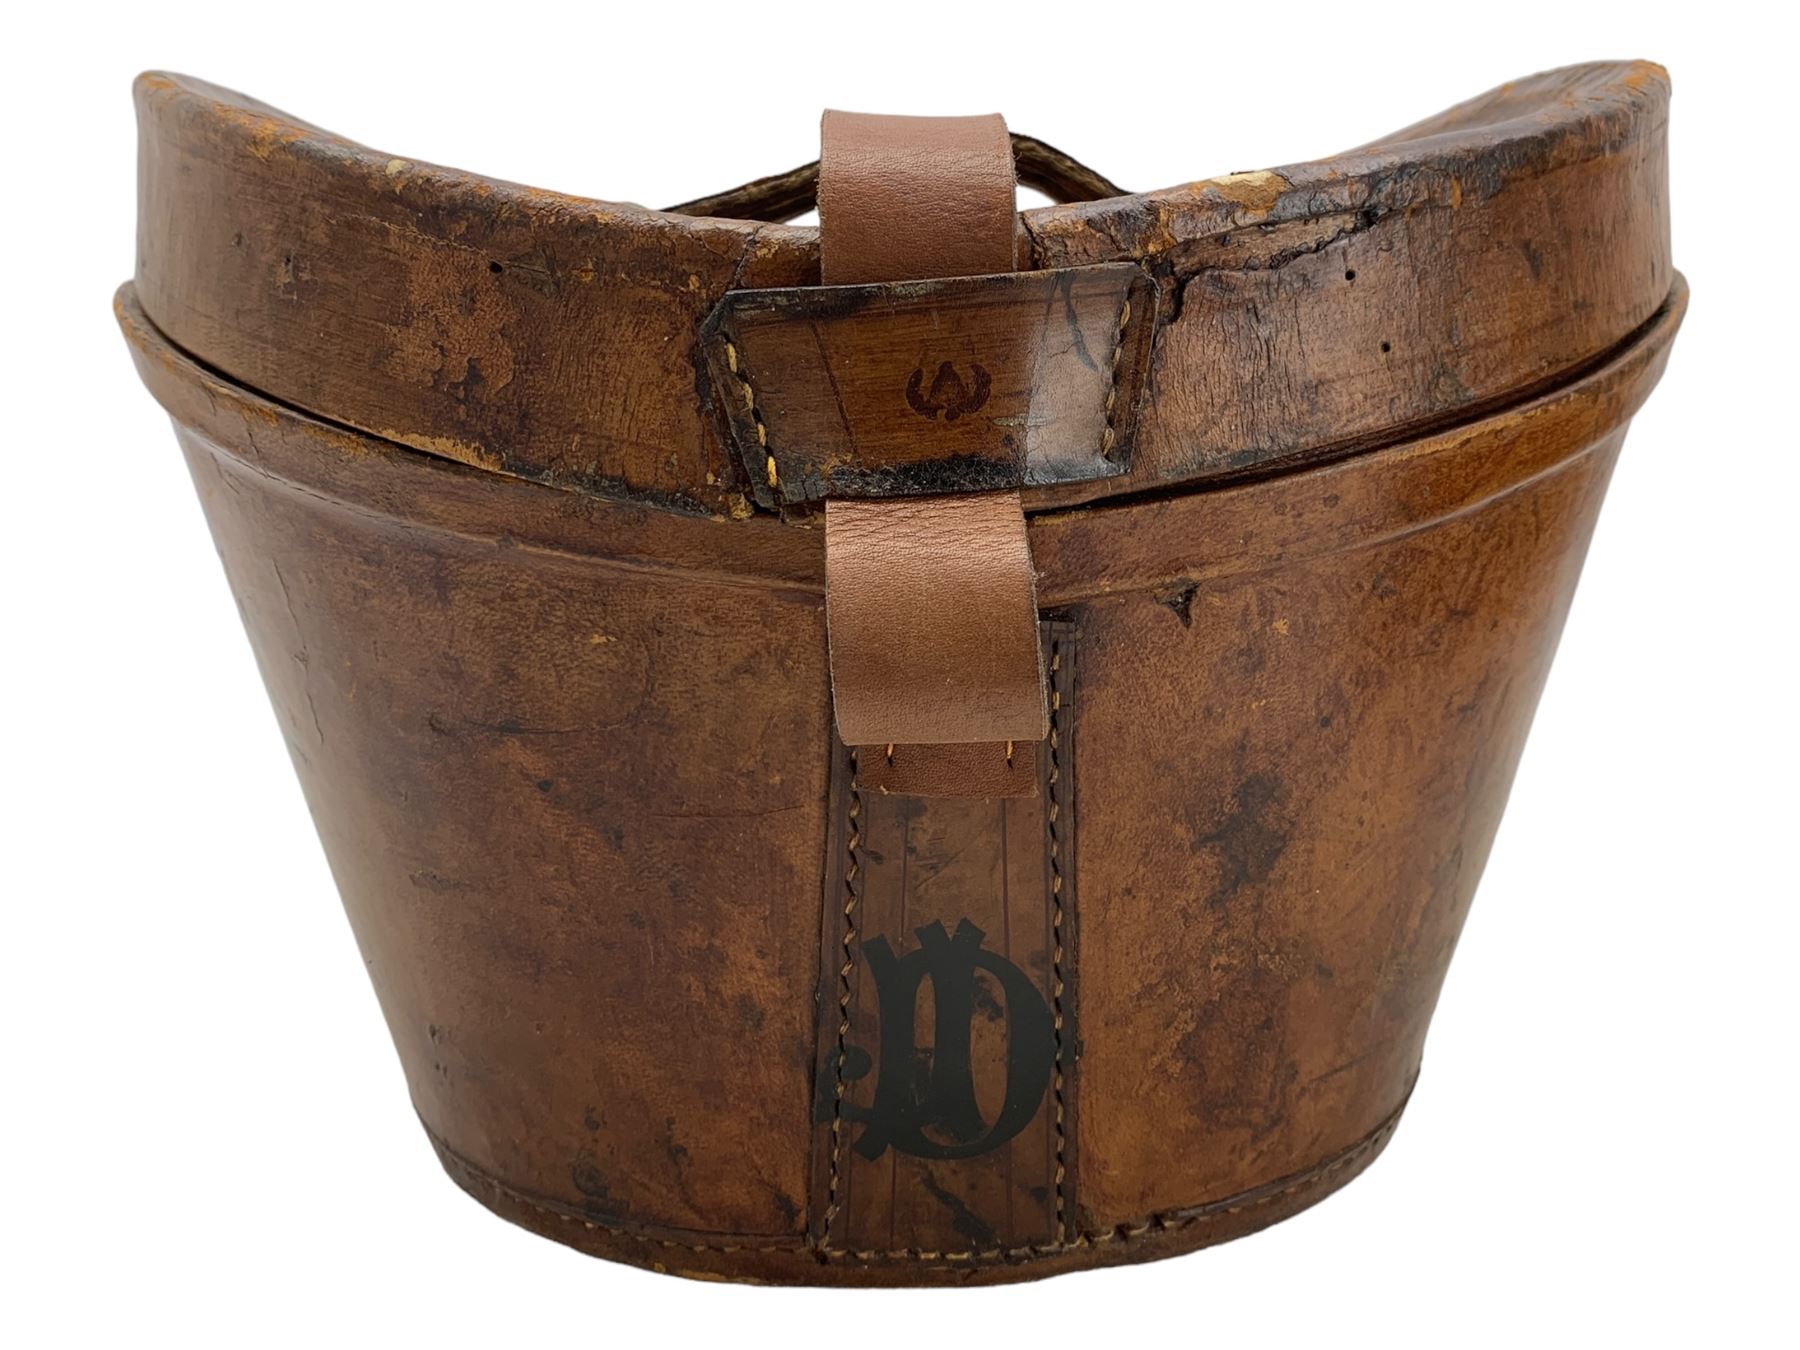 Lock & Co. top hat in tan leather hat box with brass clasp and lock - Image 7 of 8